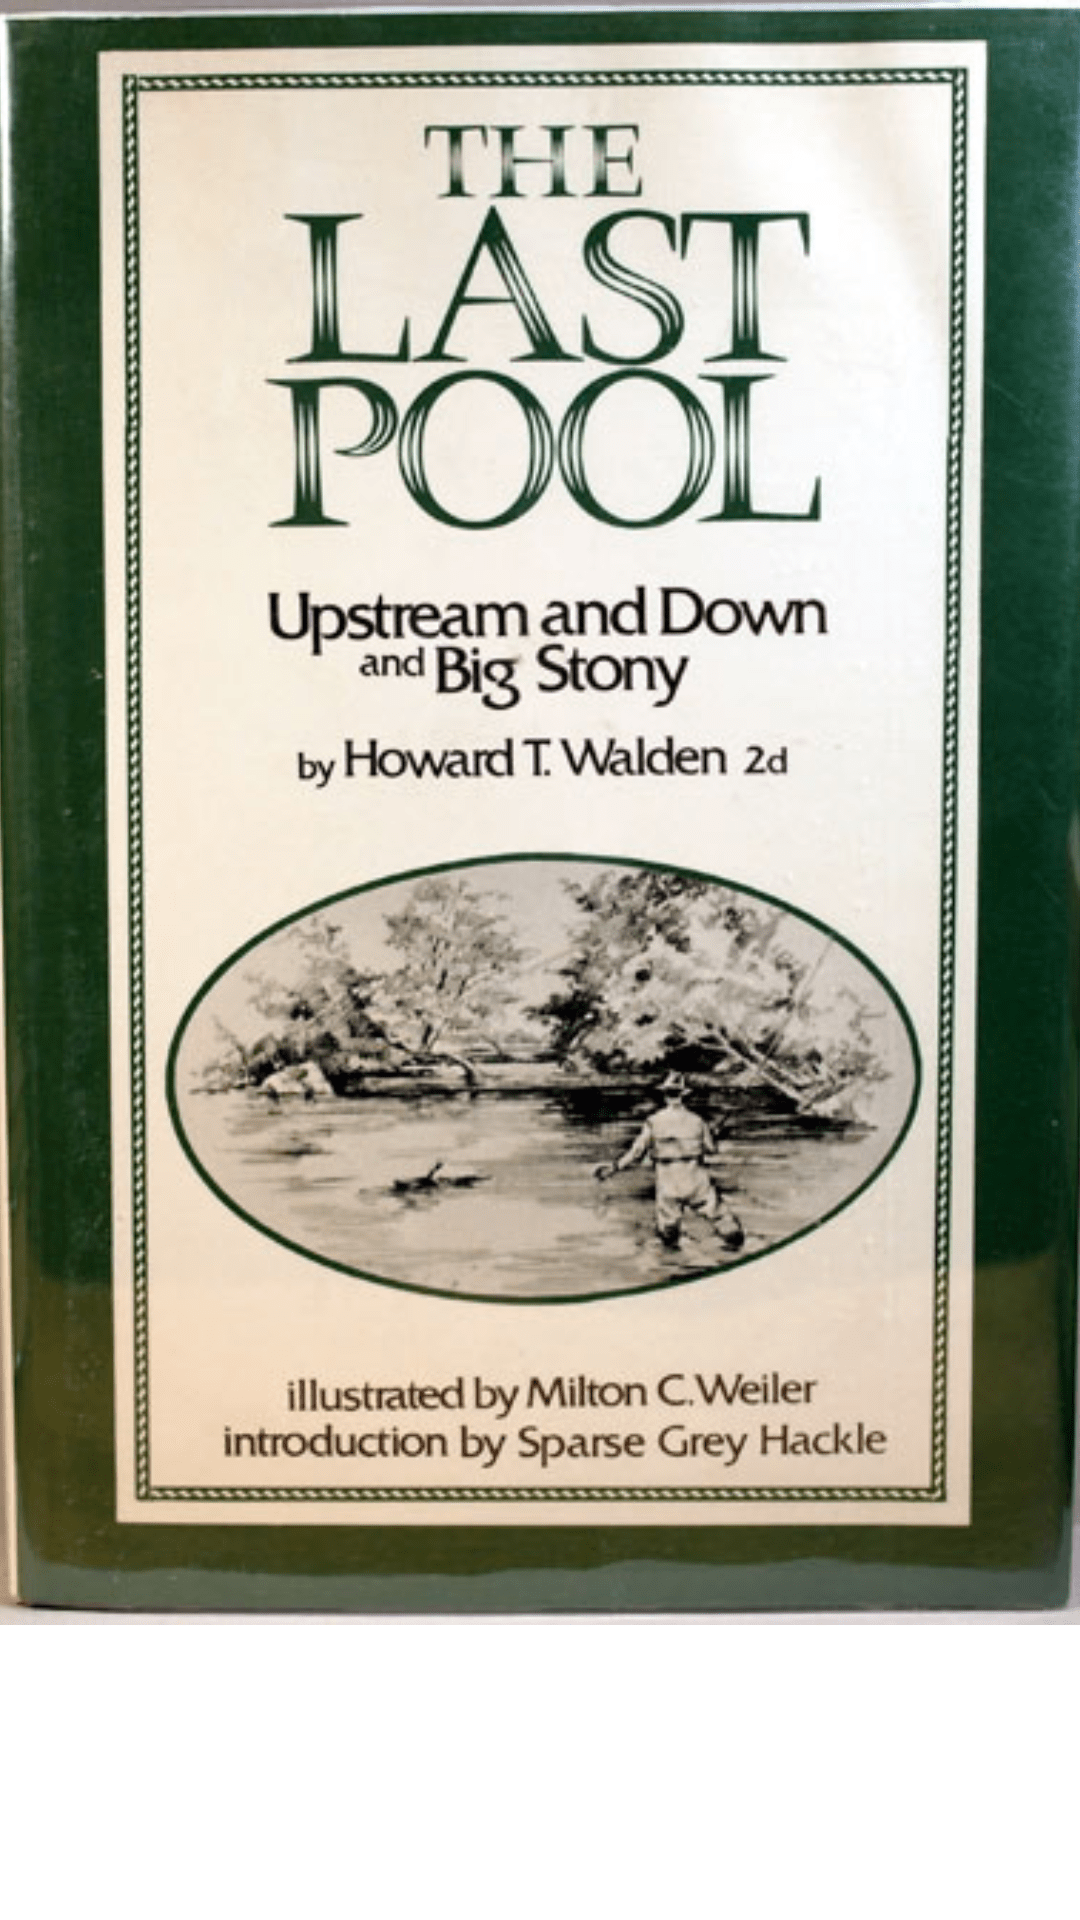 The last pool: Upstream and down, and Big stony